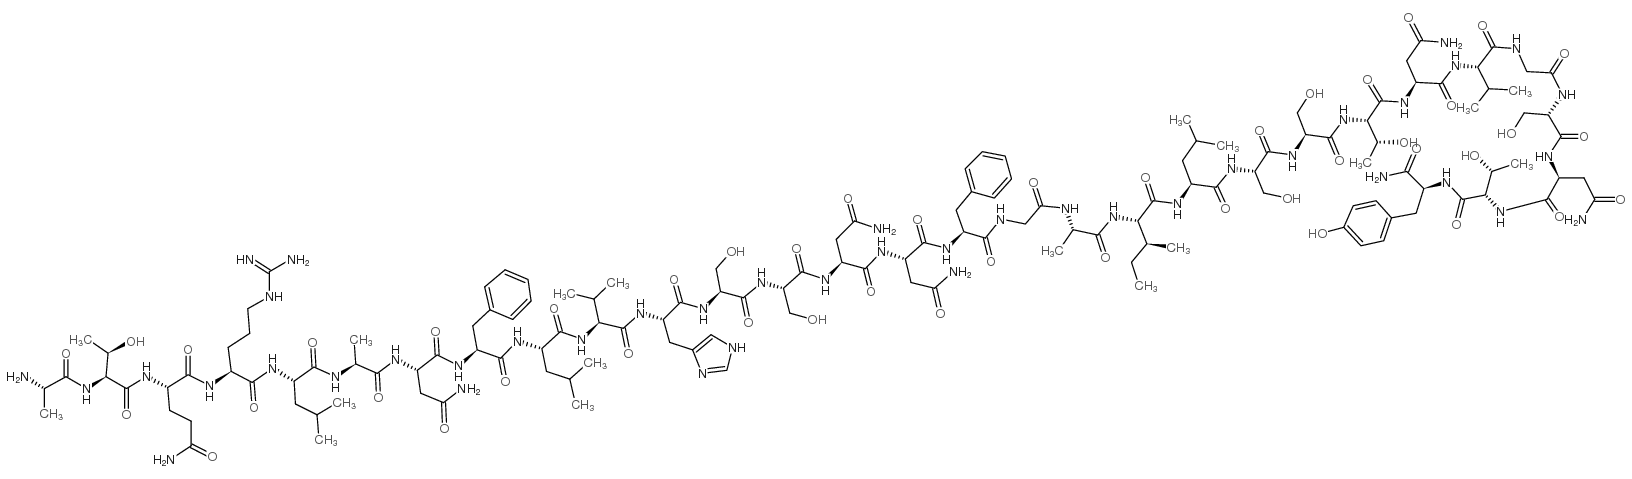 Diabetes Associated Peptide Fragment 8-37 Amide Structure